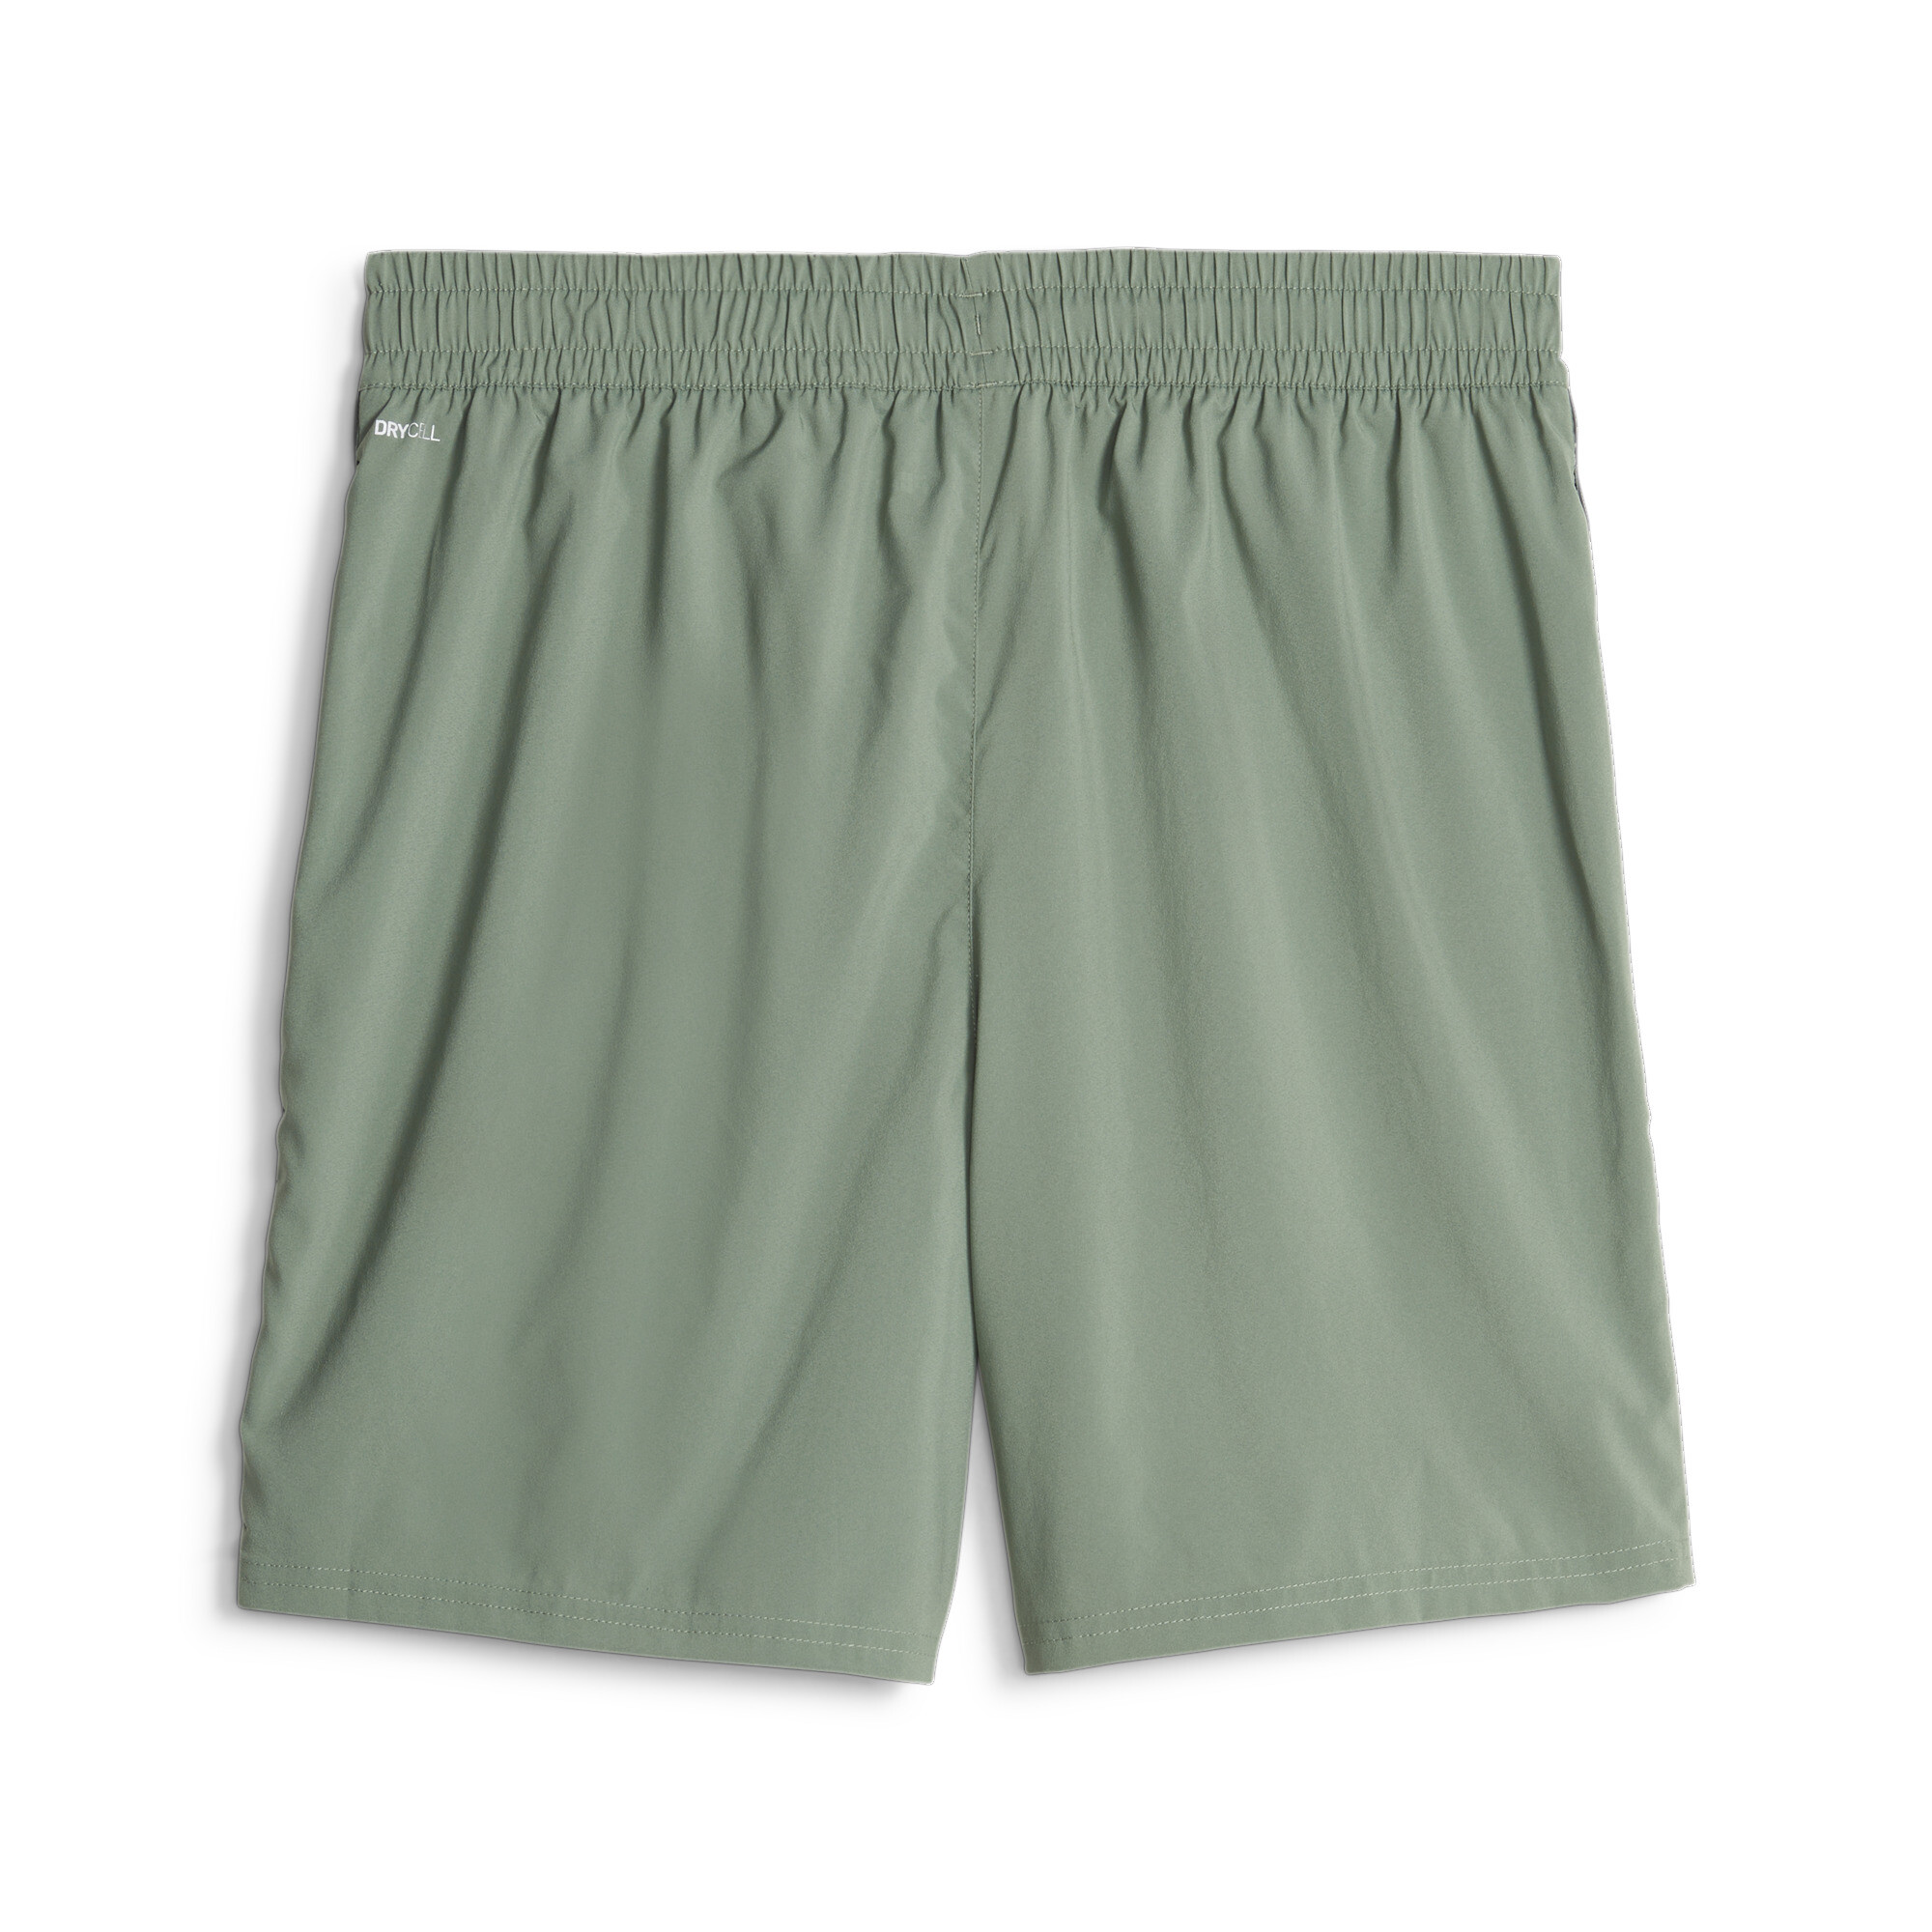 Men's PUMA Fit 7 Training Shorts In Green, Size Small